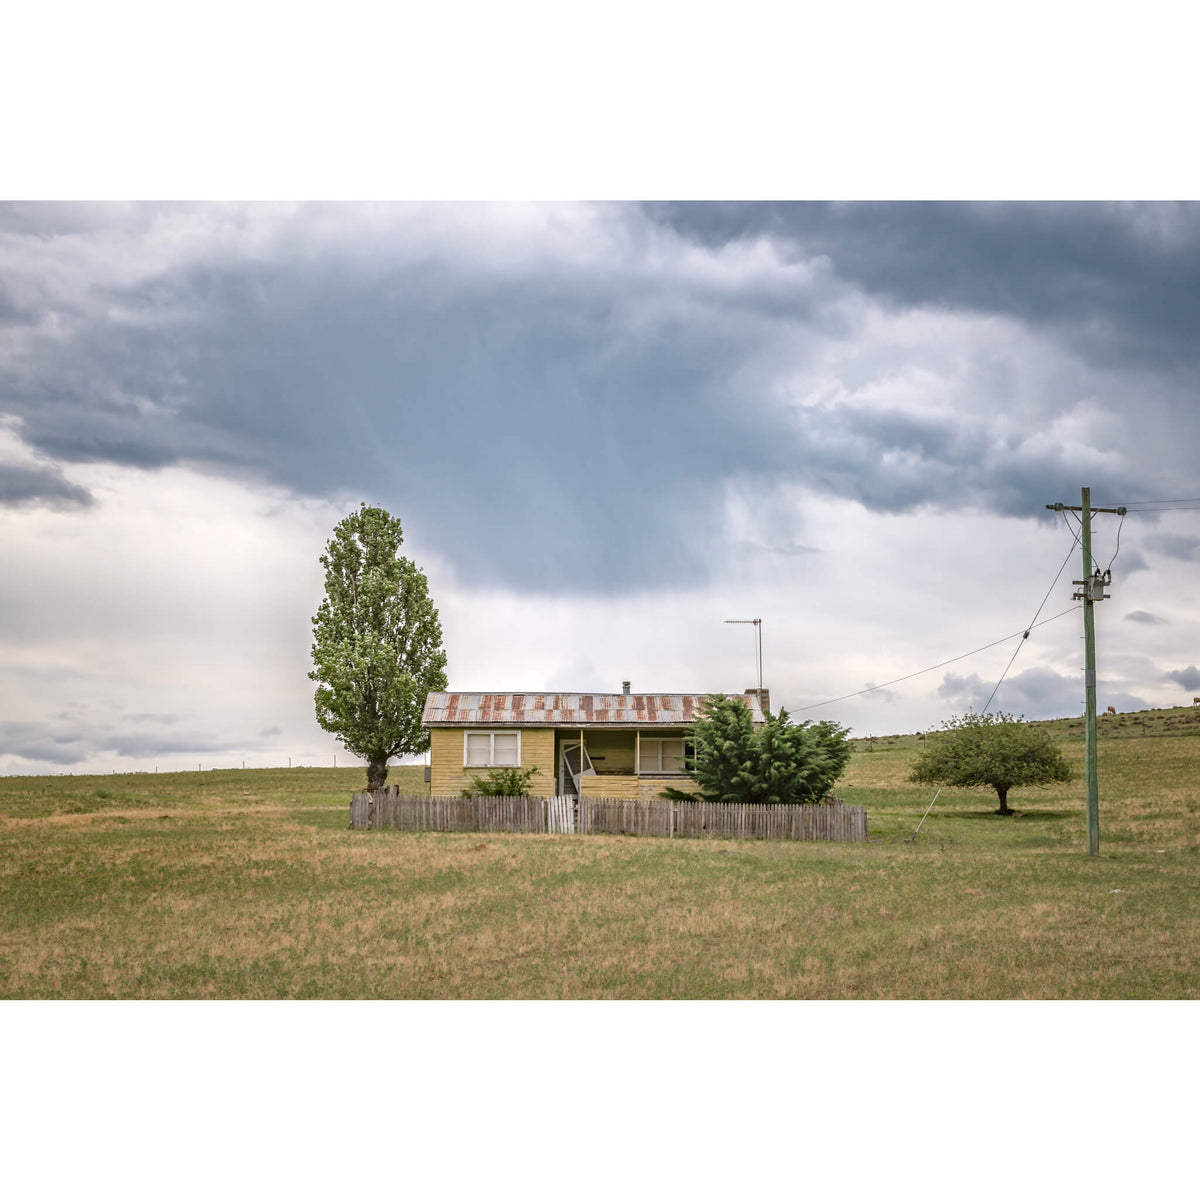 Home On the Range | A Place To Call Home Fine Art Print - Lost Collective Shop